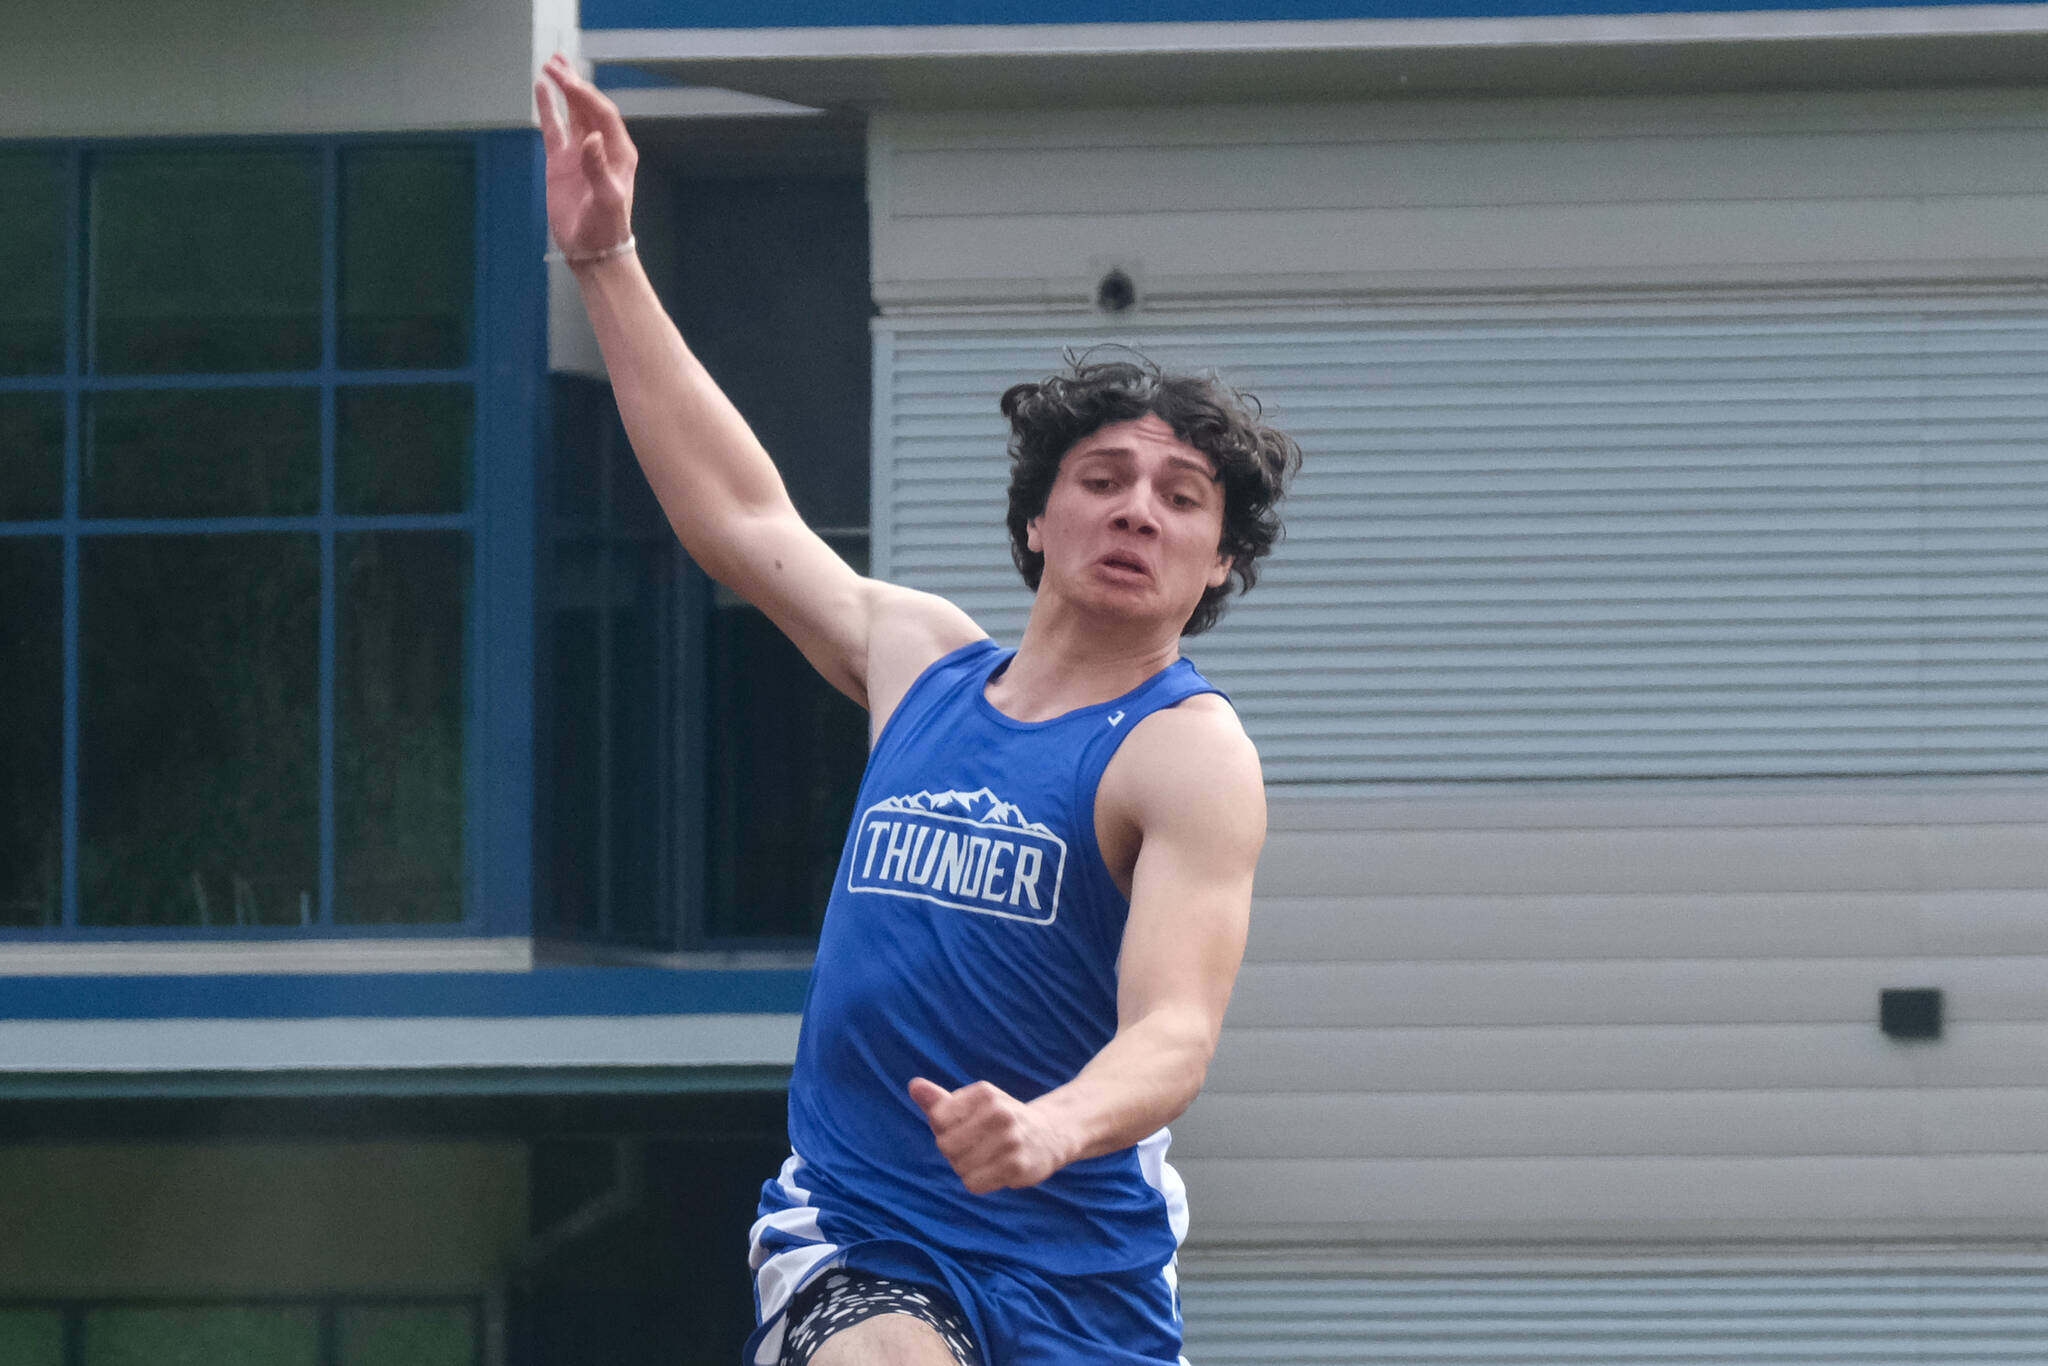 Thunder Mountain High School senior Chase Darbonne wins the Division I boys long jump during the Region V Track & Field Championships, Saturday, at TMHS. (Klas Stolpe / Juneau Empire)